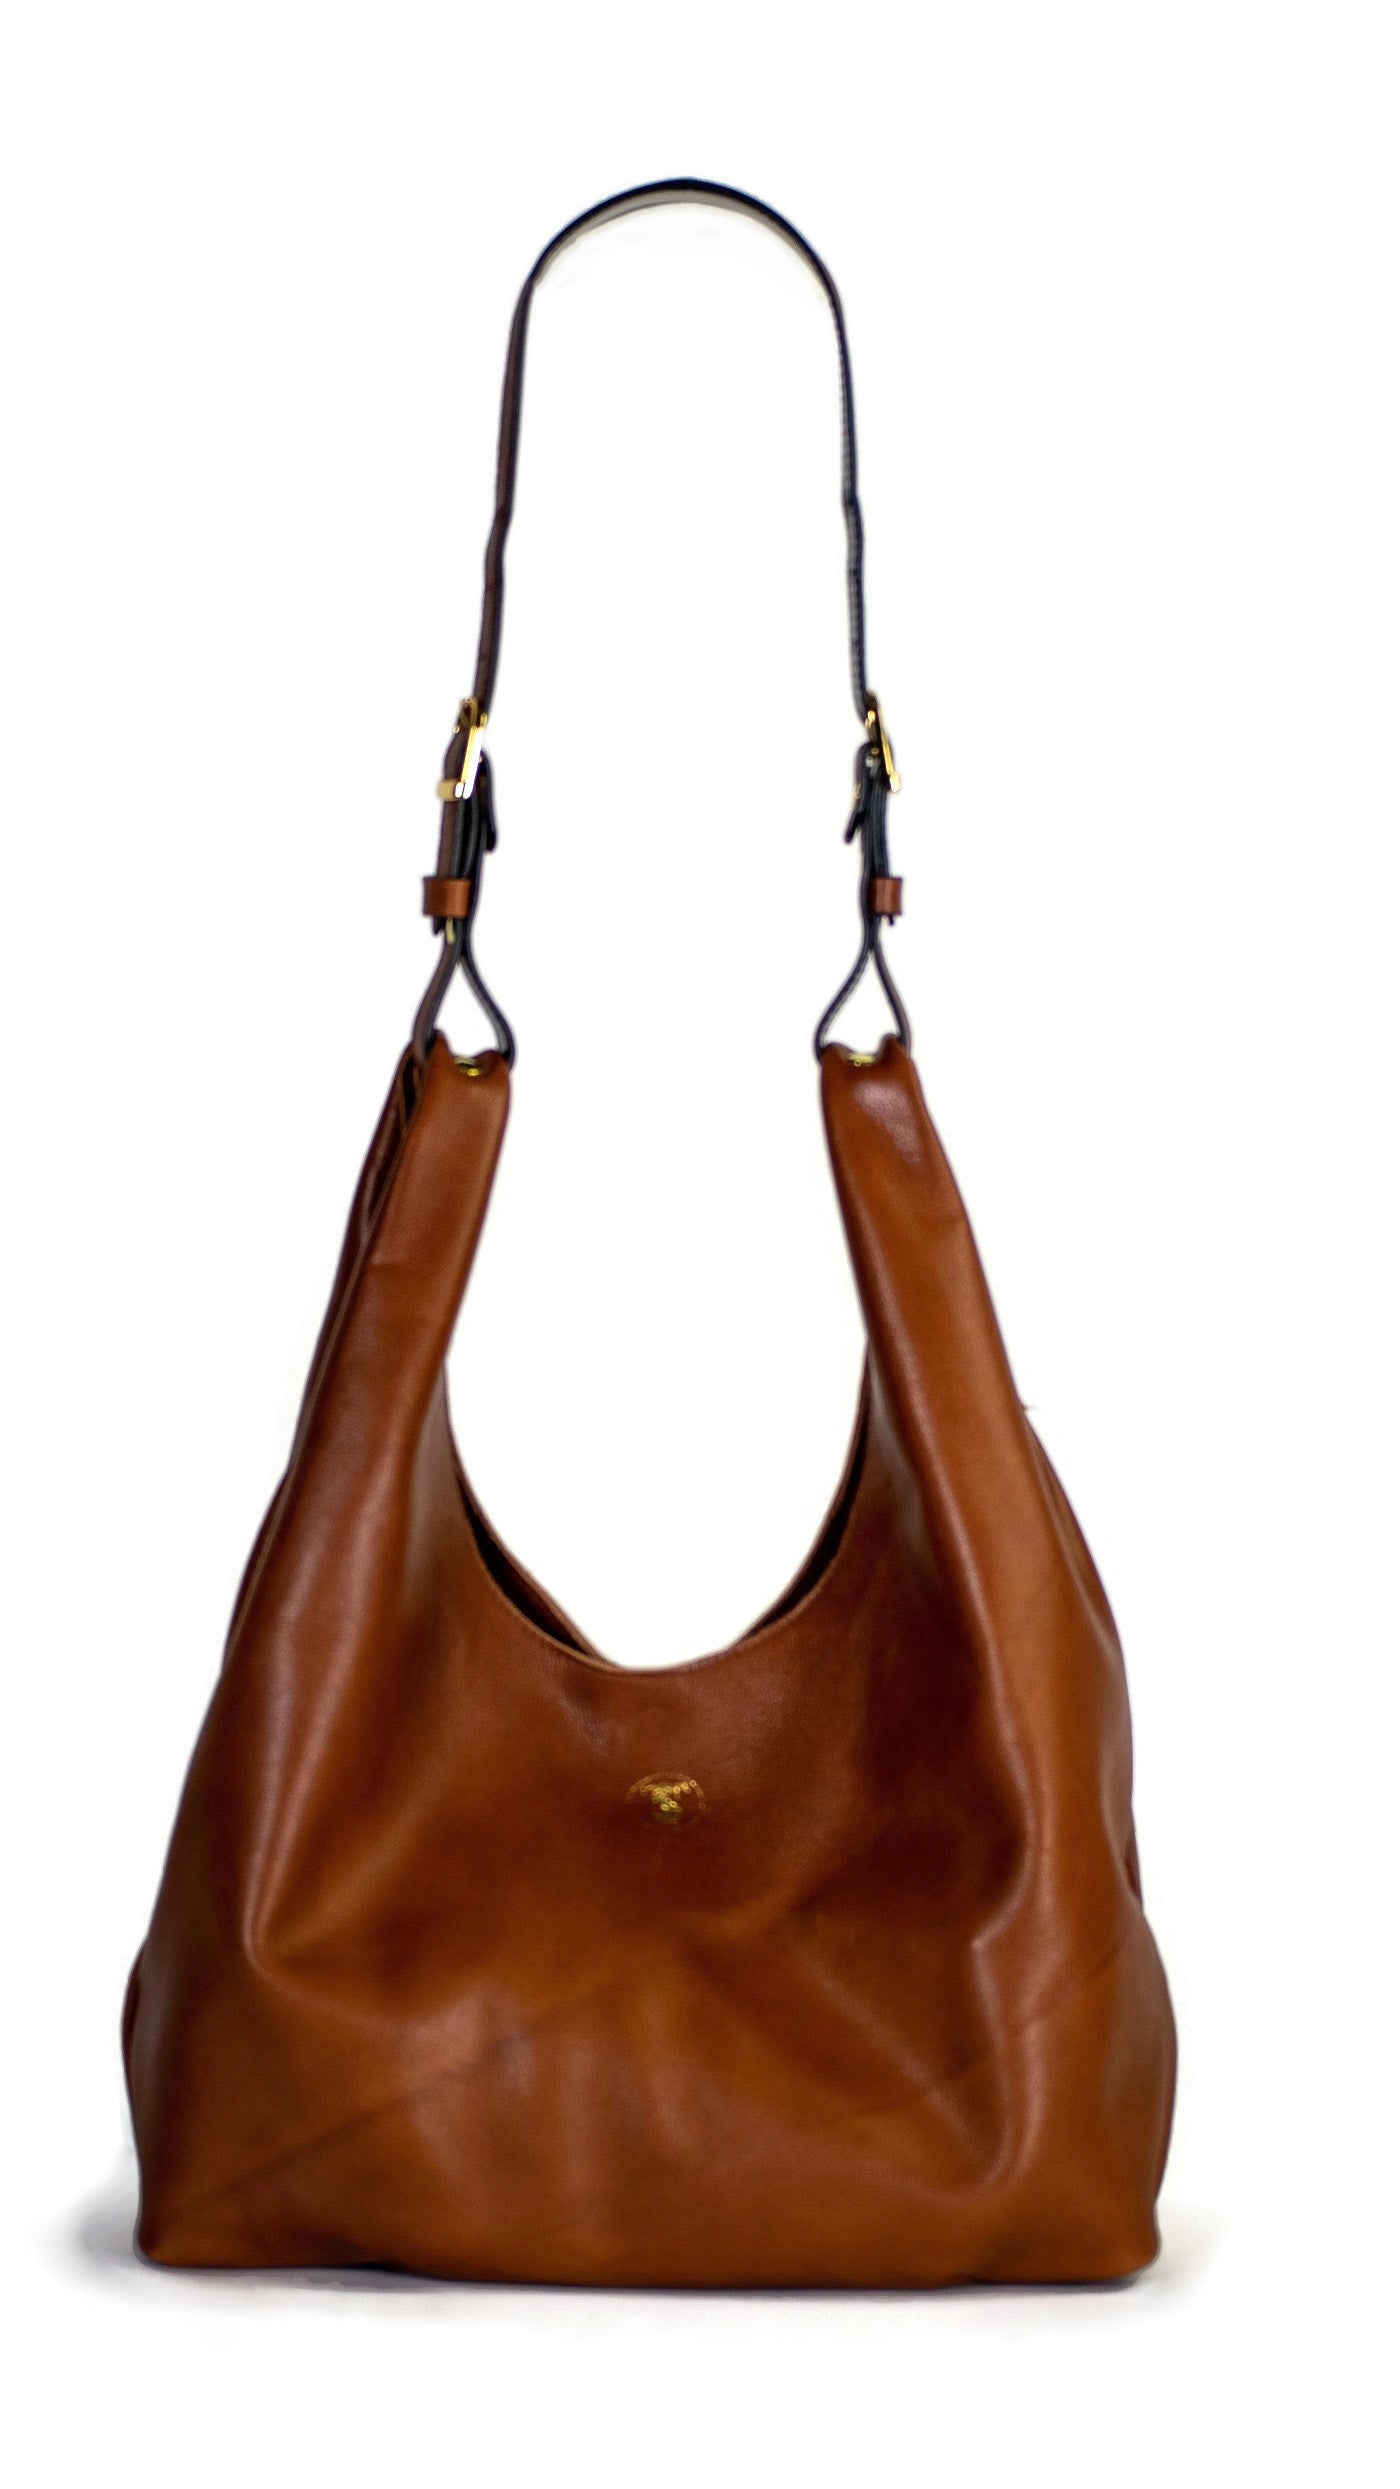 Front of Cognac brown leather hobo shoulder bag handcrafted in Italian calfskin by slow fashion indie designer Liv McClintock. Made in Wilmington Delaware USA.